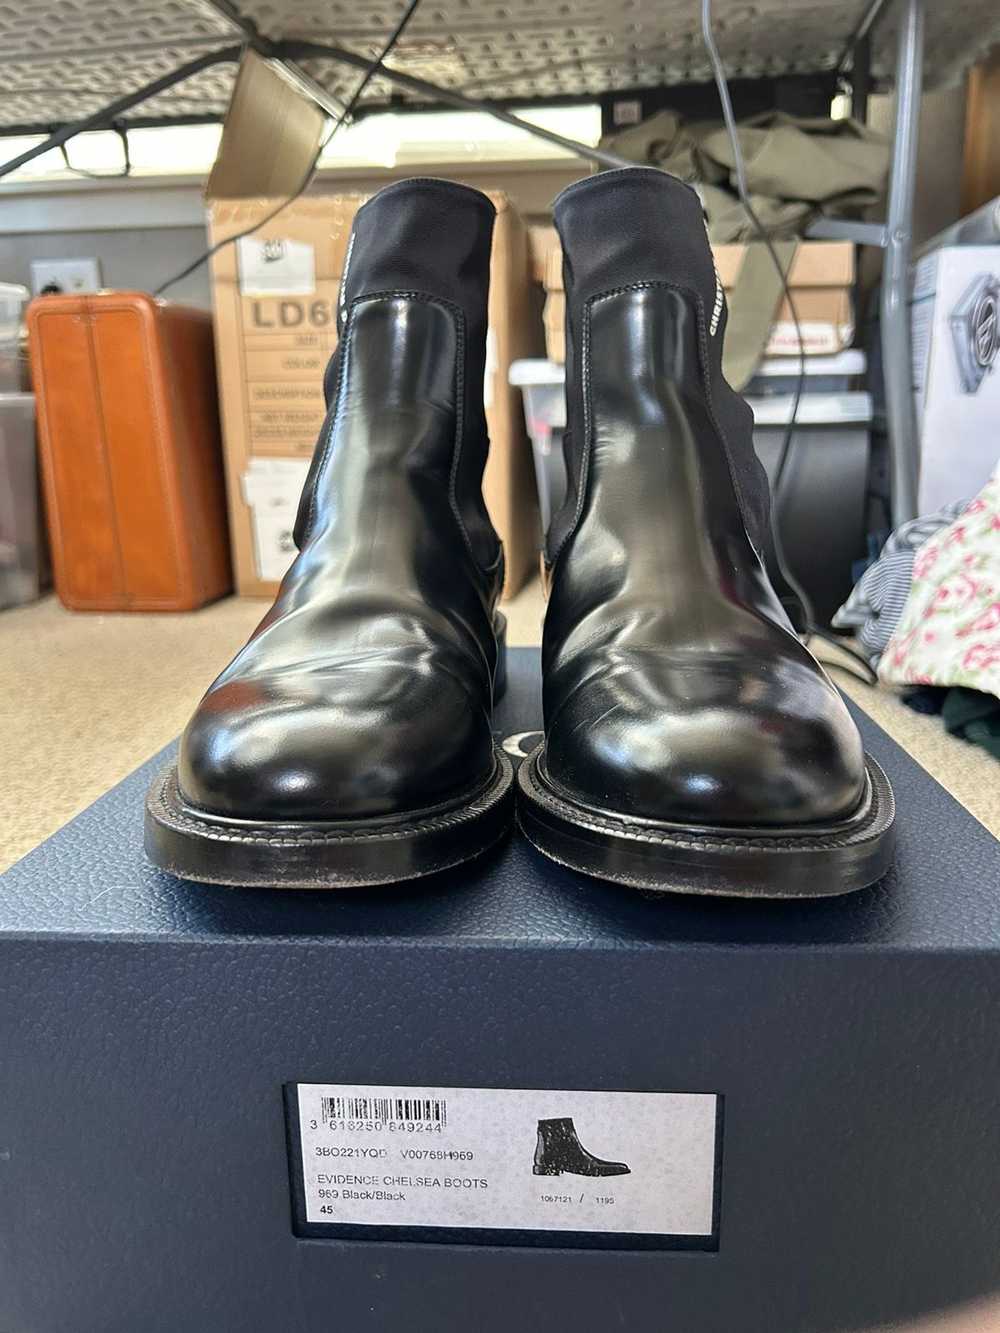 Dior Dior Men AW19 Evidence Chelsea boots - image 11